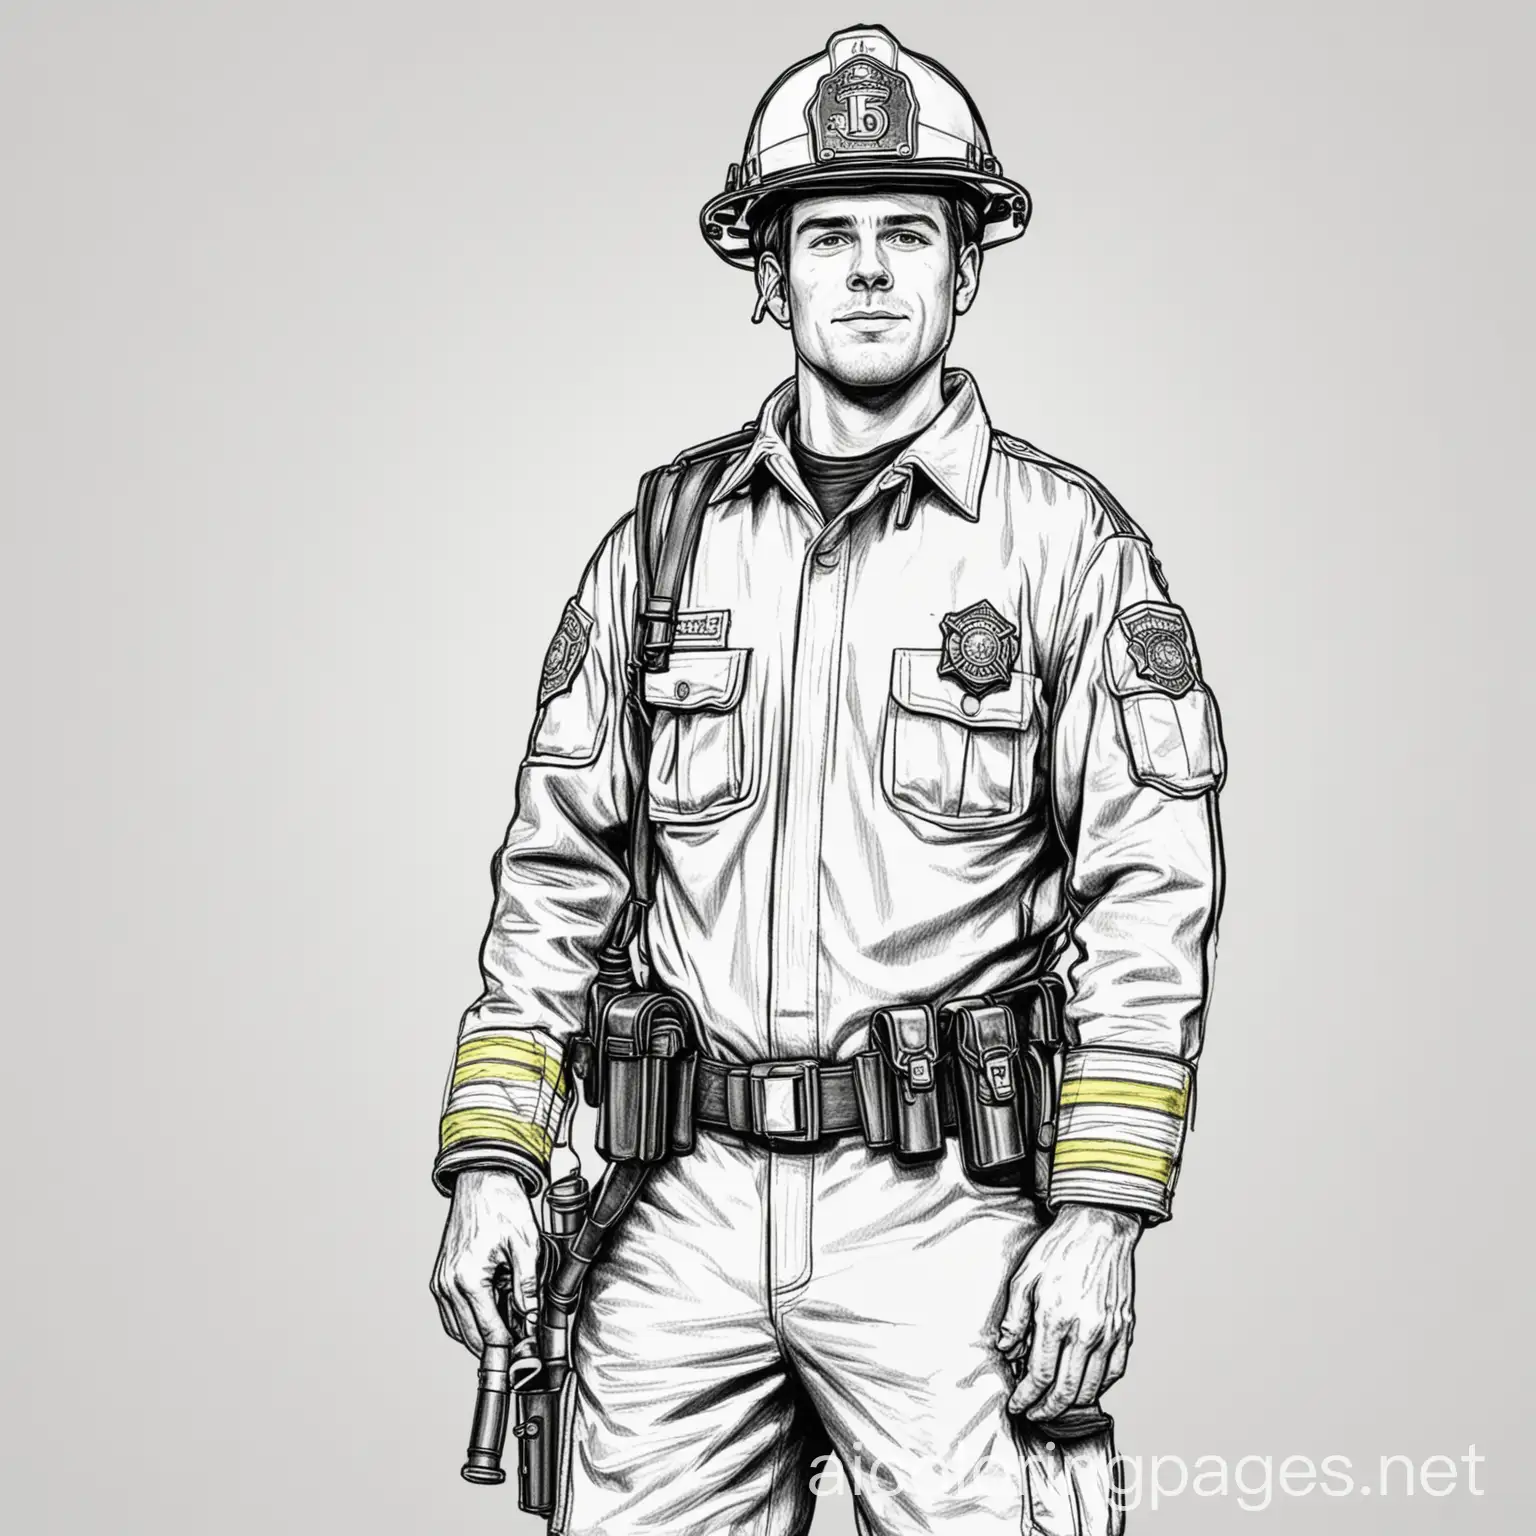 Firefighter, Police Officer, EMT, Coloring Page, black and white, line art, white background, Simplicity, Ample White Space